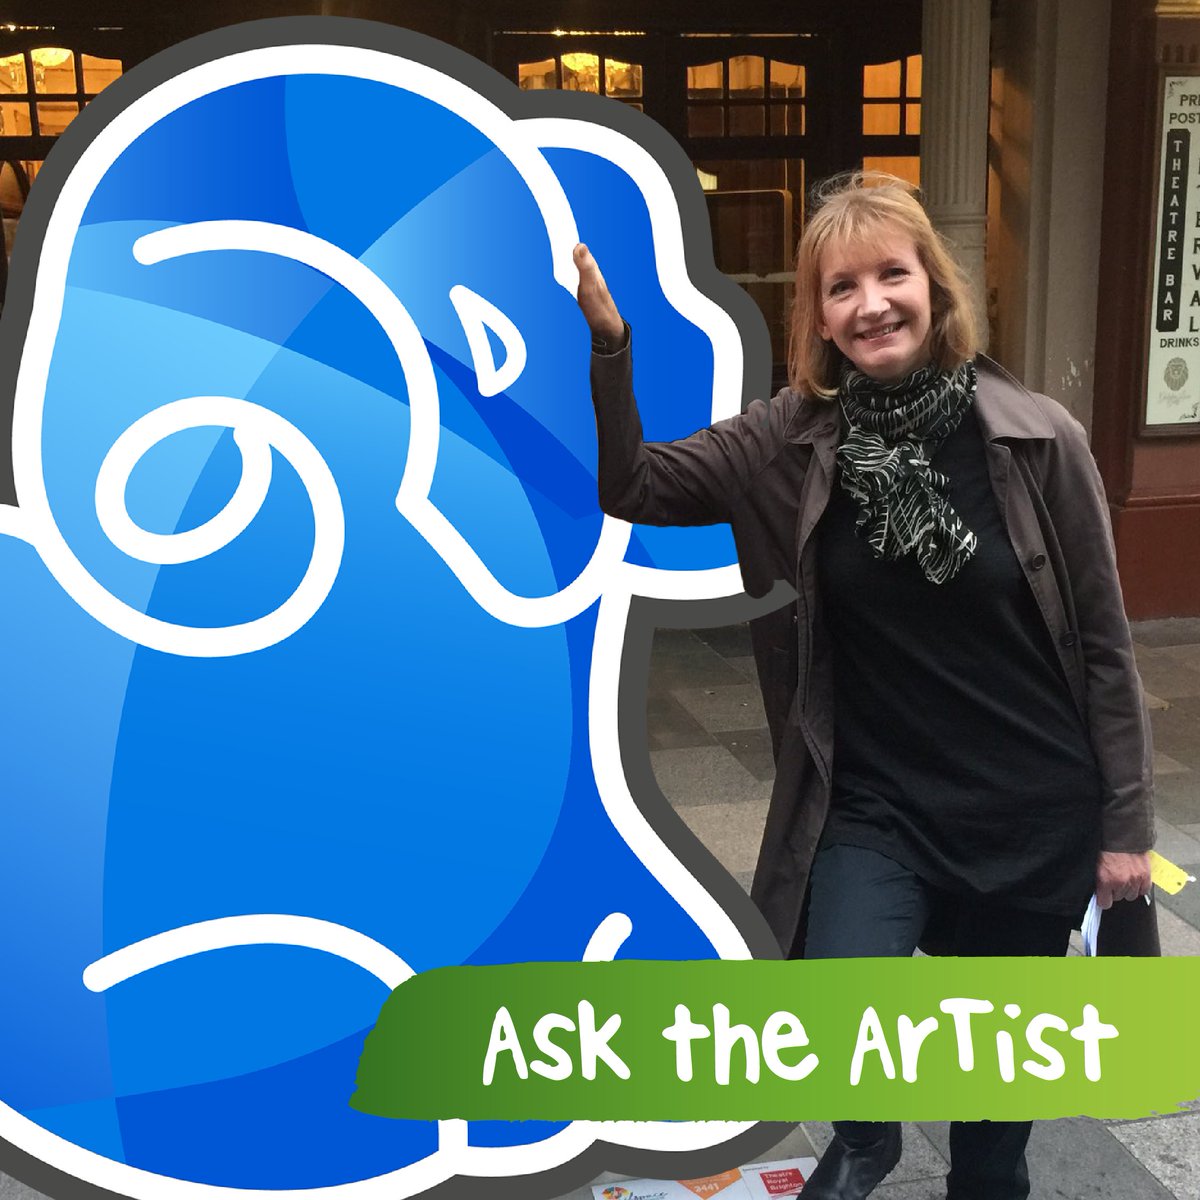 Rameses’ #DerbyRamTrail challenge 3️⃣

👩‍🎨 Curious about Rameses? Life as an artist? The process and inspiration?

Ask @JudithBerrill your questions below👇 

#ArtForKids #AskTheArtist